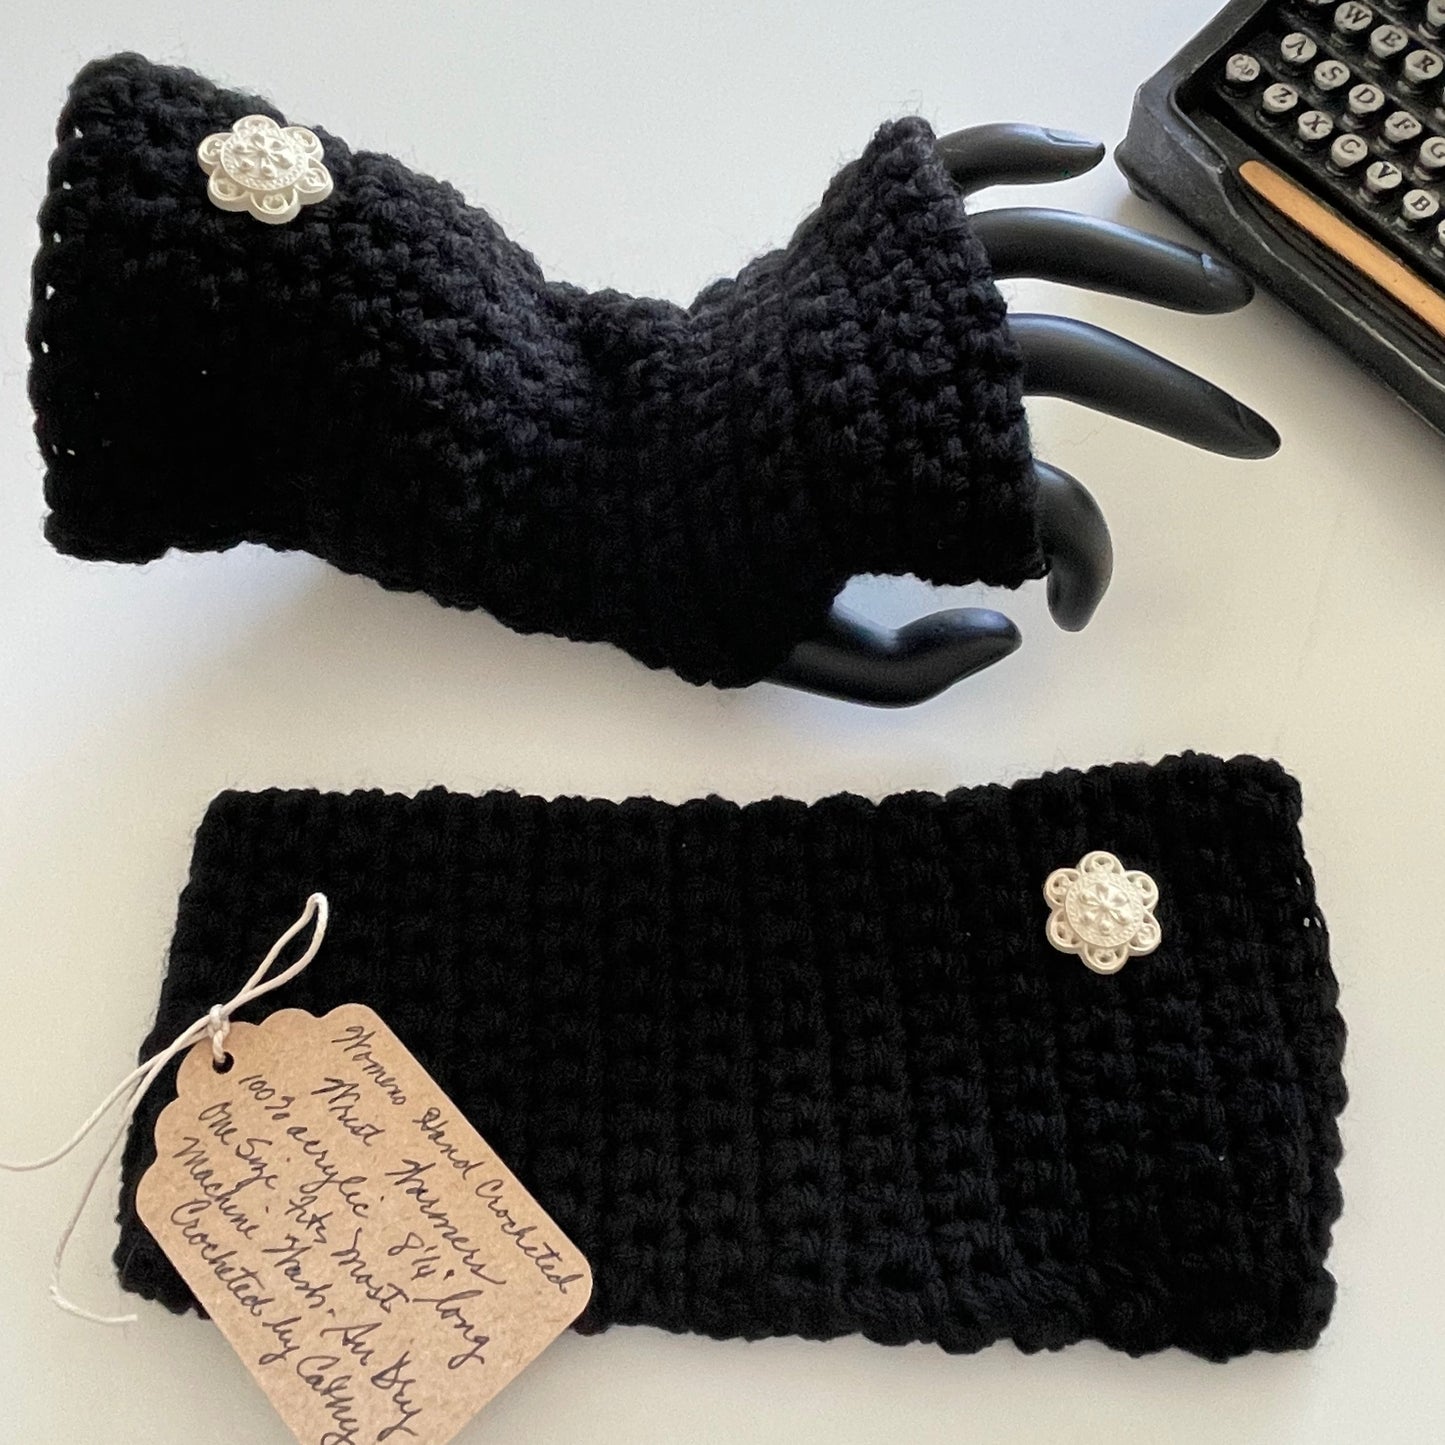 Texting Tech Wrist Warmers Solid Black Ivory Cream Flower Button Crochet Knit Fall Winter Writing Gaming Fingerless Gloves Embellished photo of one glove modeled on acrylic hand, the other flat on table